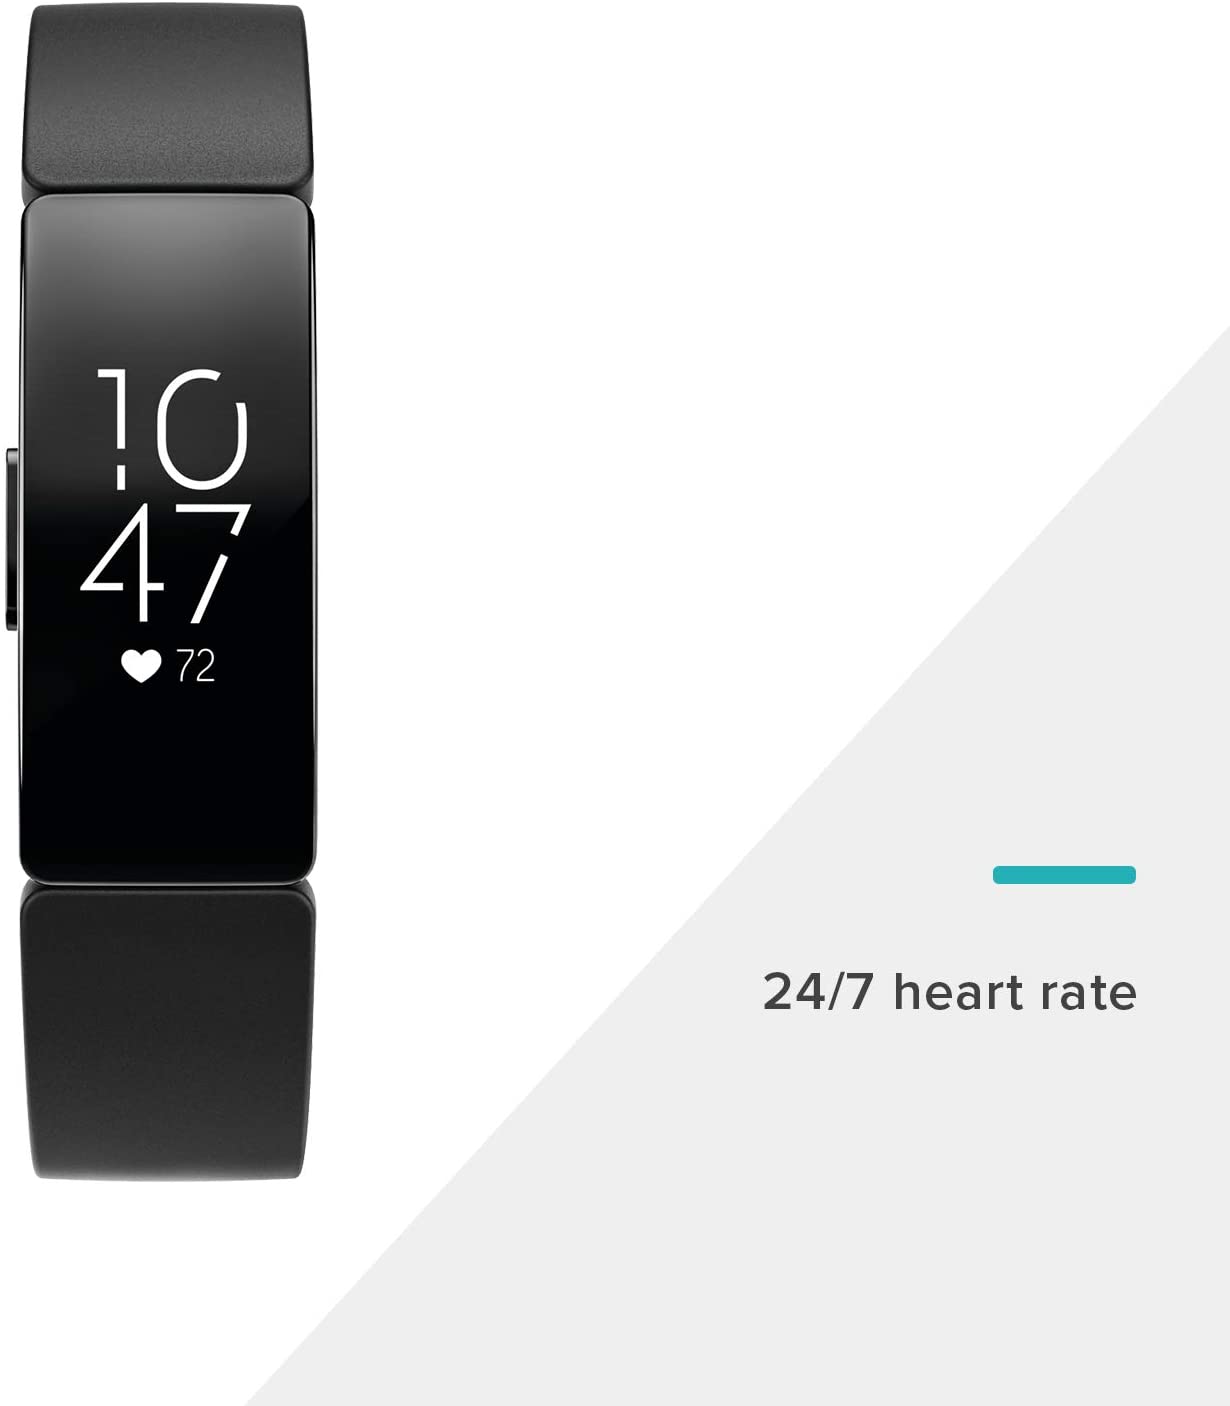 Restored Fitbit FB413BKBK Inspire HR Heart Rate & Fitness Tracker, One Size (S & L bands included) (Refurbished) - image 2 of 6